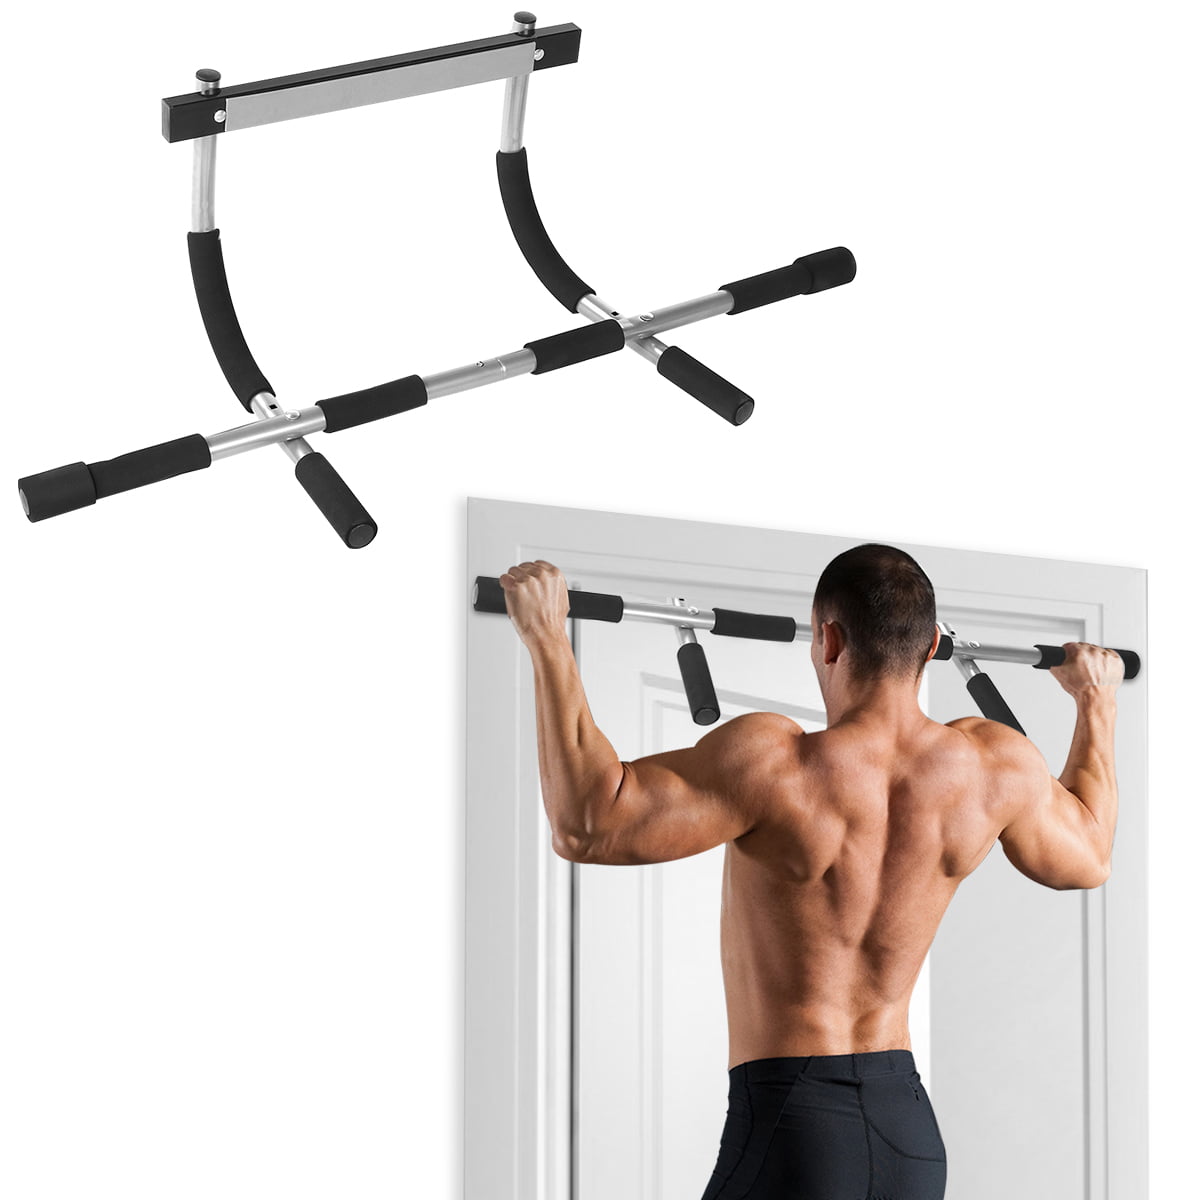 Home Gym Exercise Equipment,Weights for Exercises,Upper Body Workout Bar,Portable Gym System Fitness Equipment,for Workout Equipment for Home Workouts. youger Pull up bar for Doorway,Chin Up Bar 